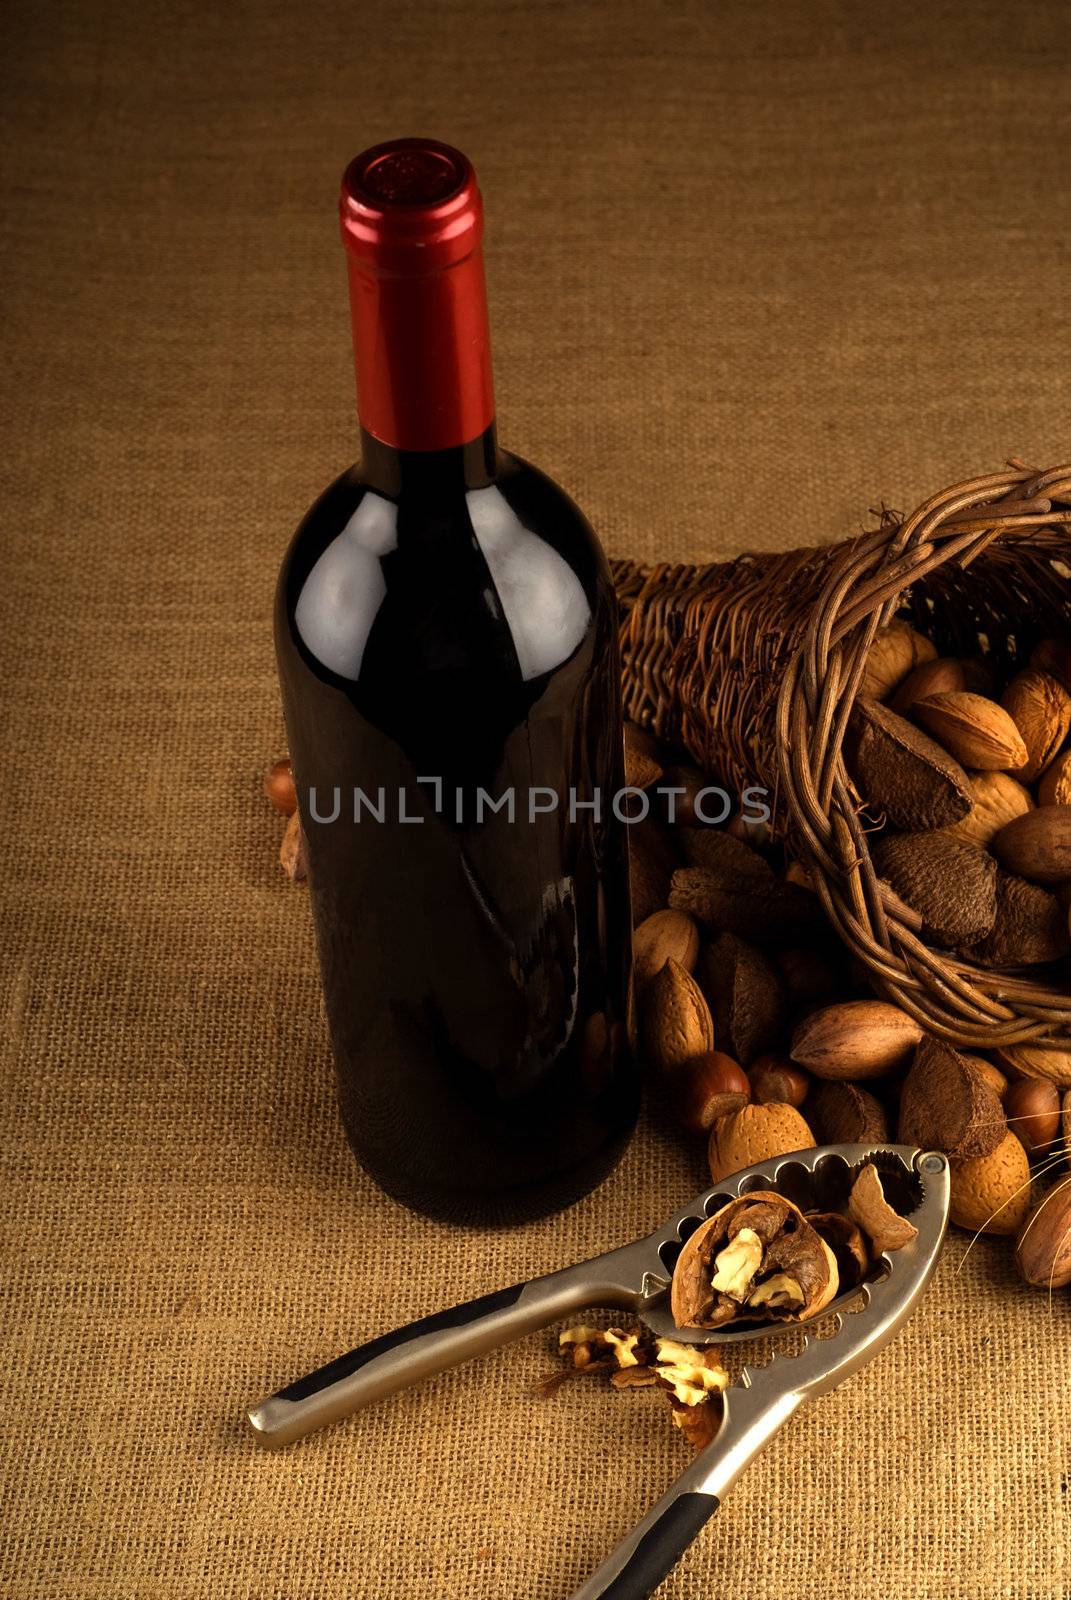 Assortment of nuts in basket with red wine bottle and nutcracker on brown background